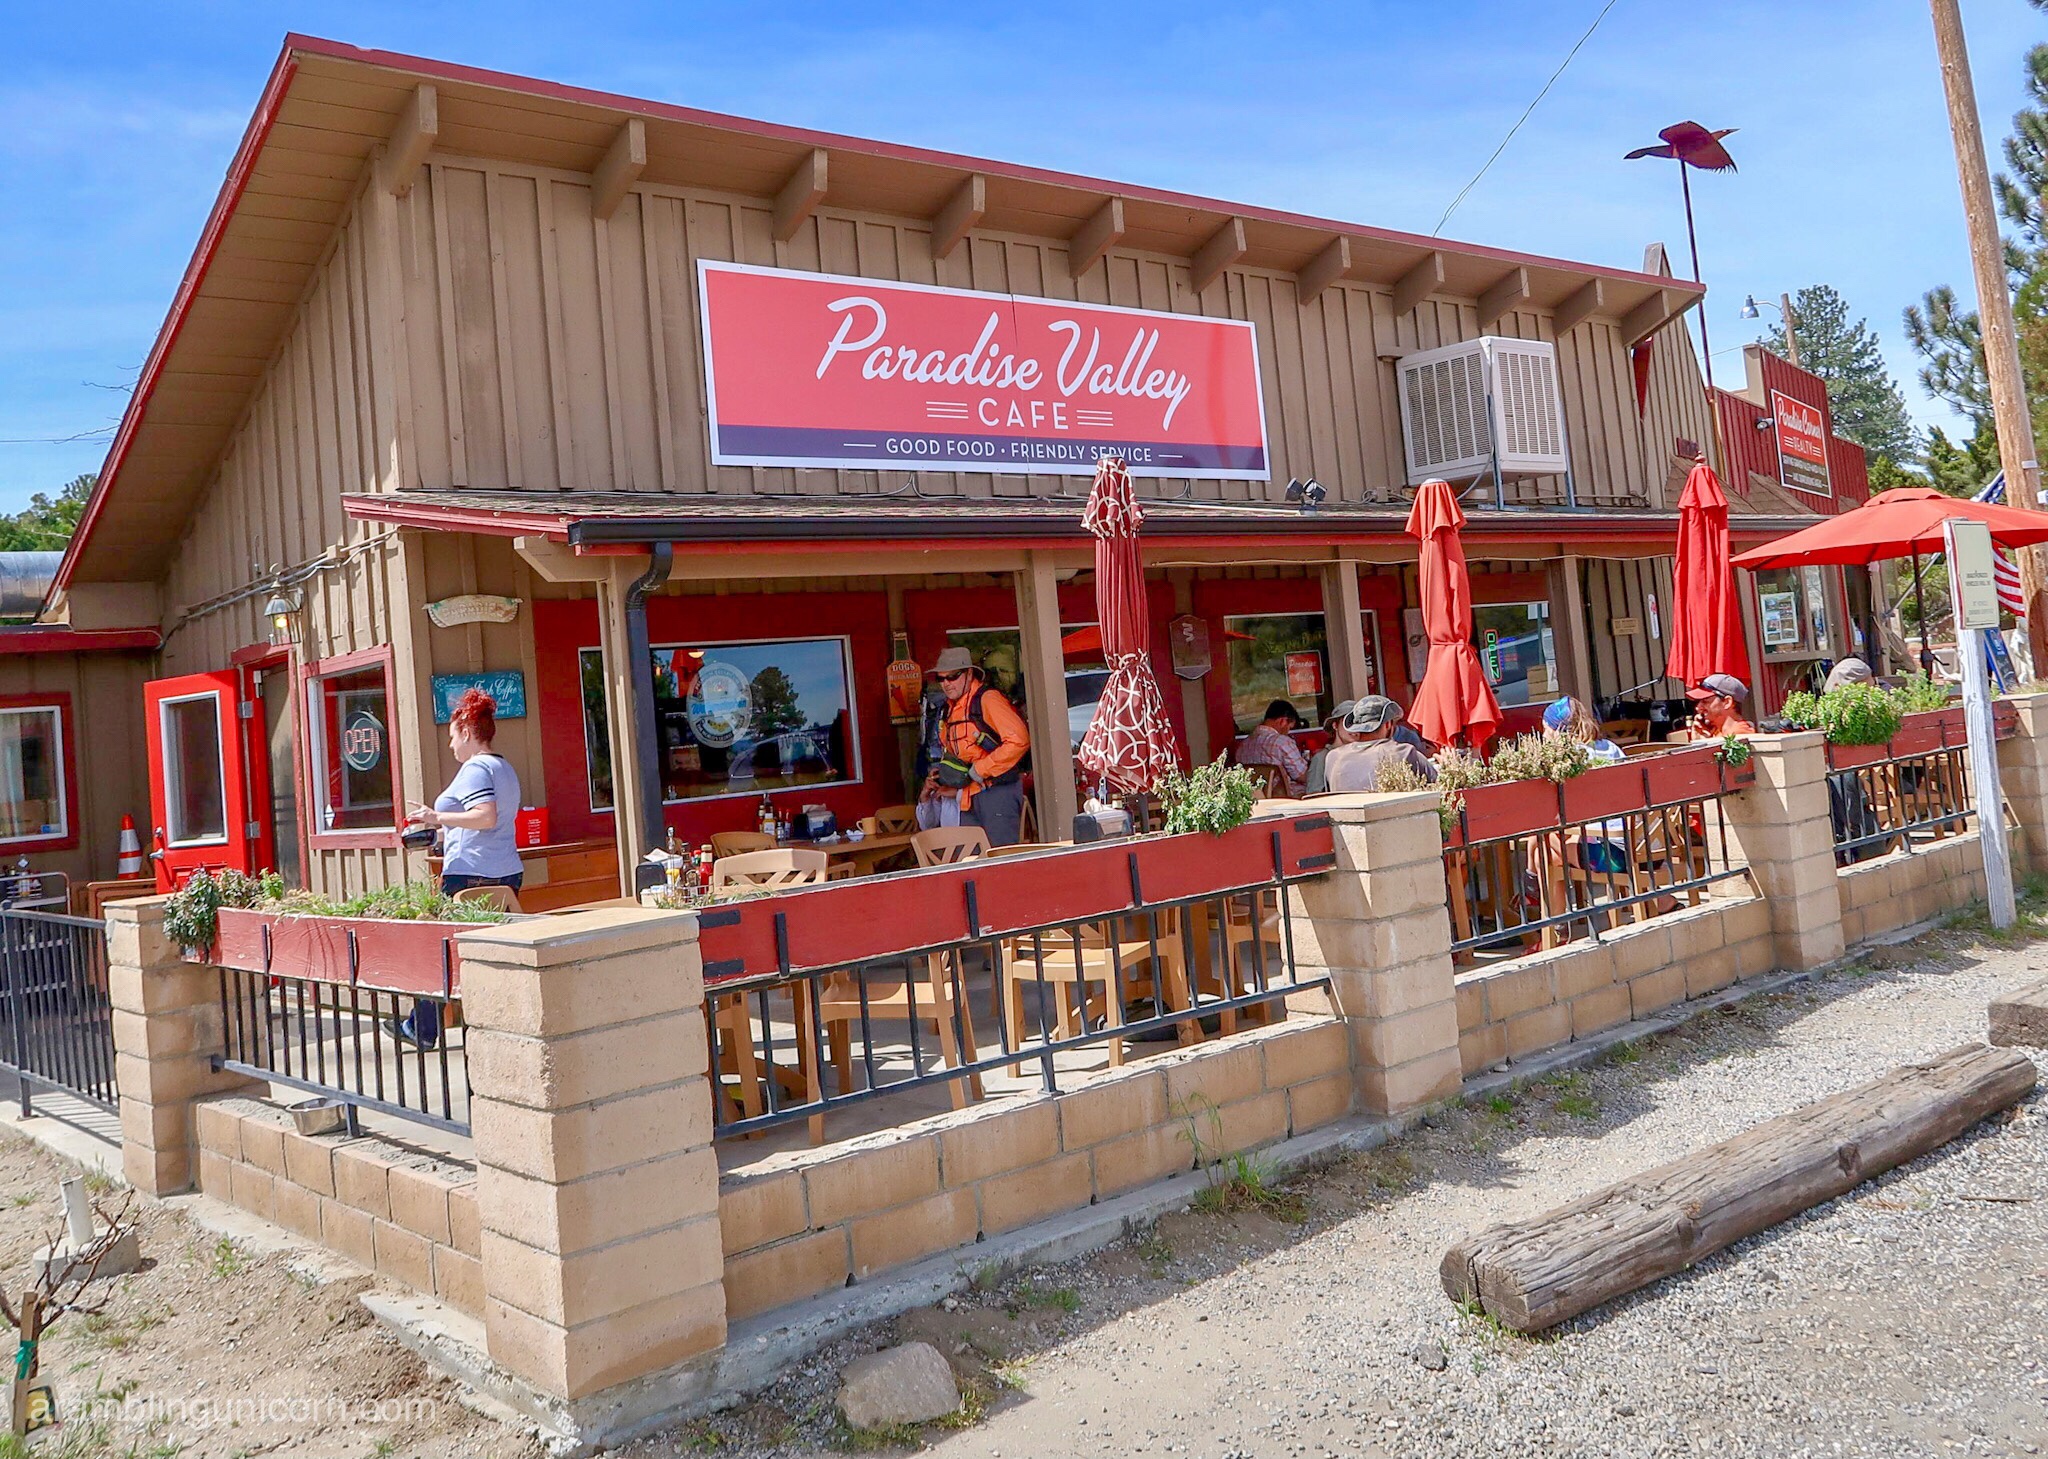 Pacific Crest Trail Day 14 – The Best Burger Ever at the Paradise Valley Cafe